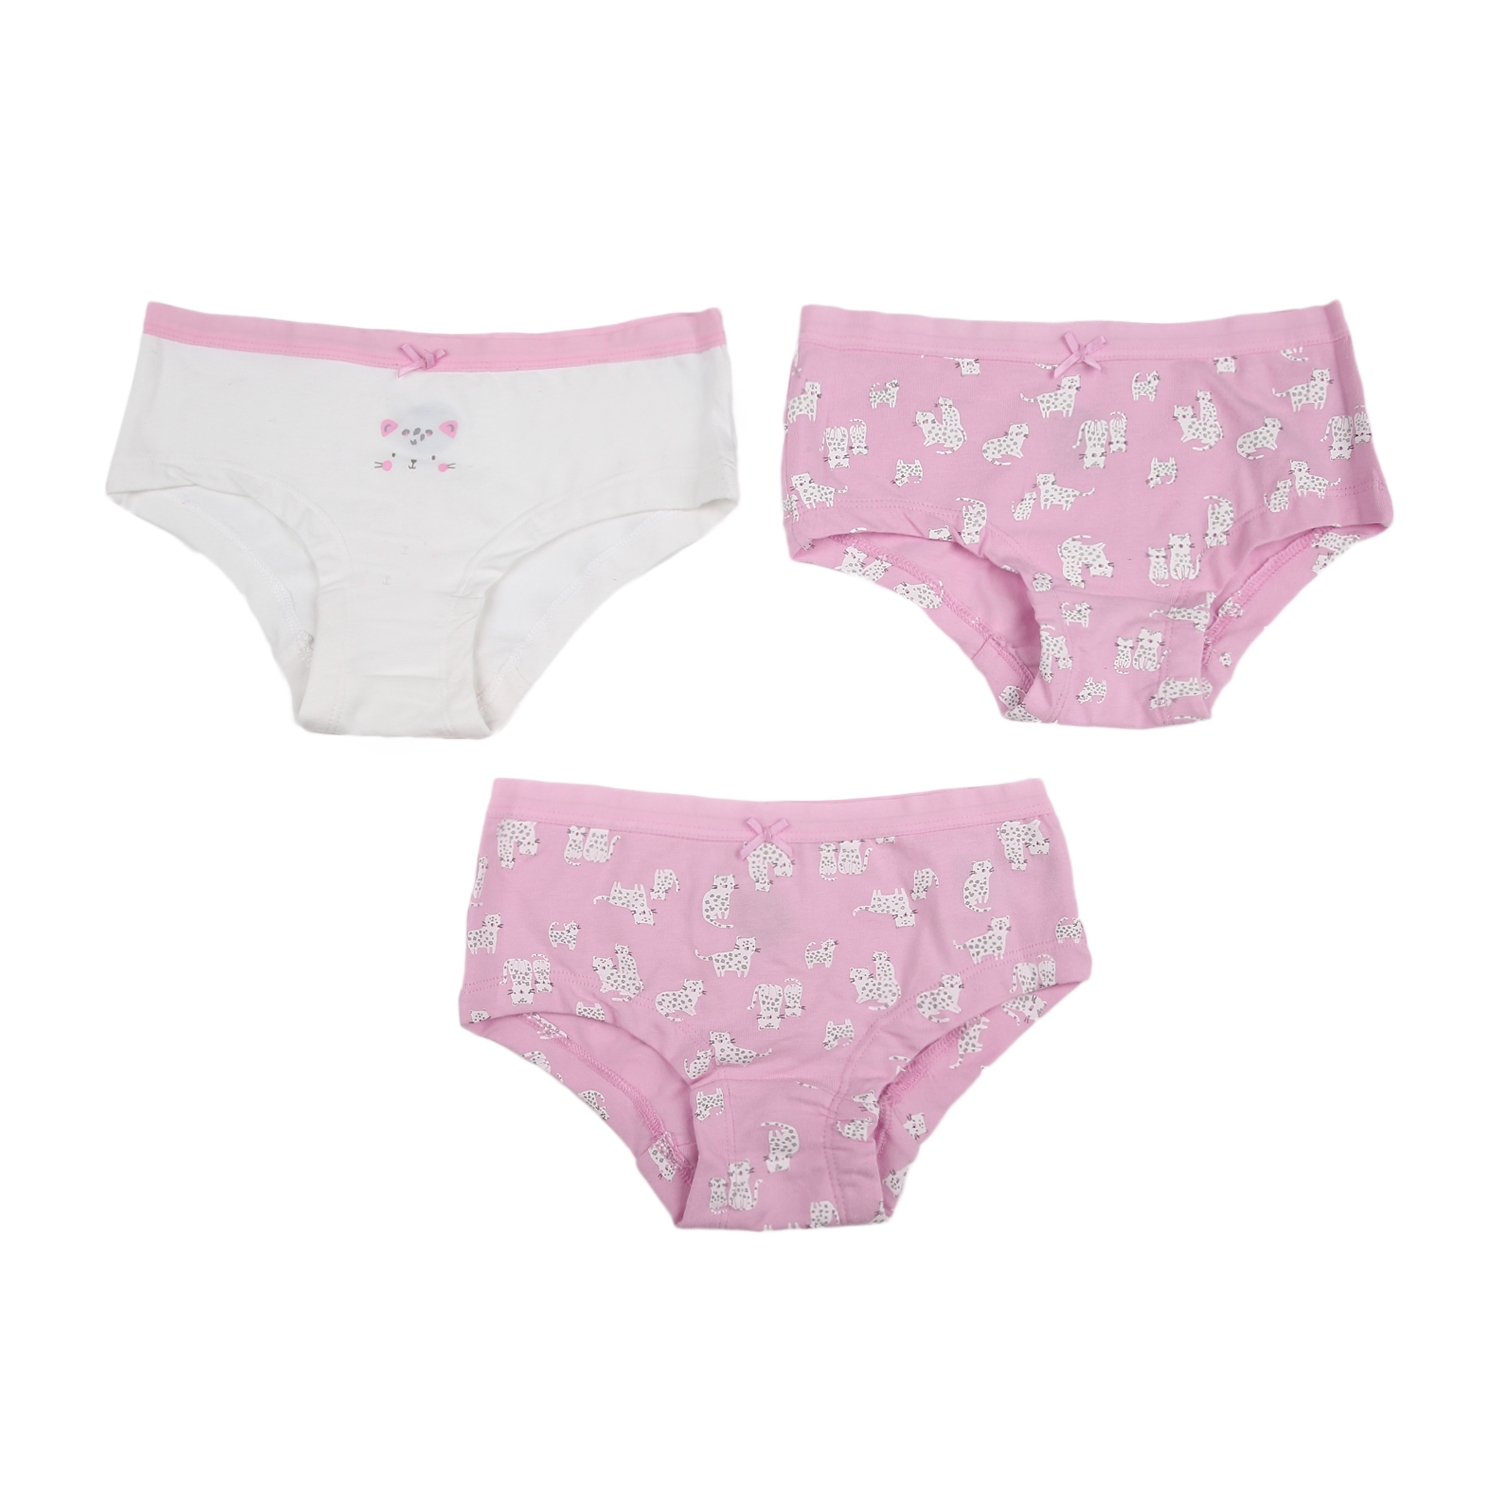 Mothercare | Girls Printed Briefs - Pack of 3 - Pink white